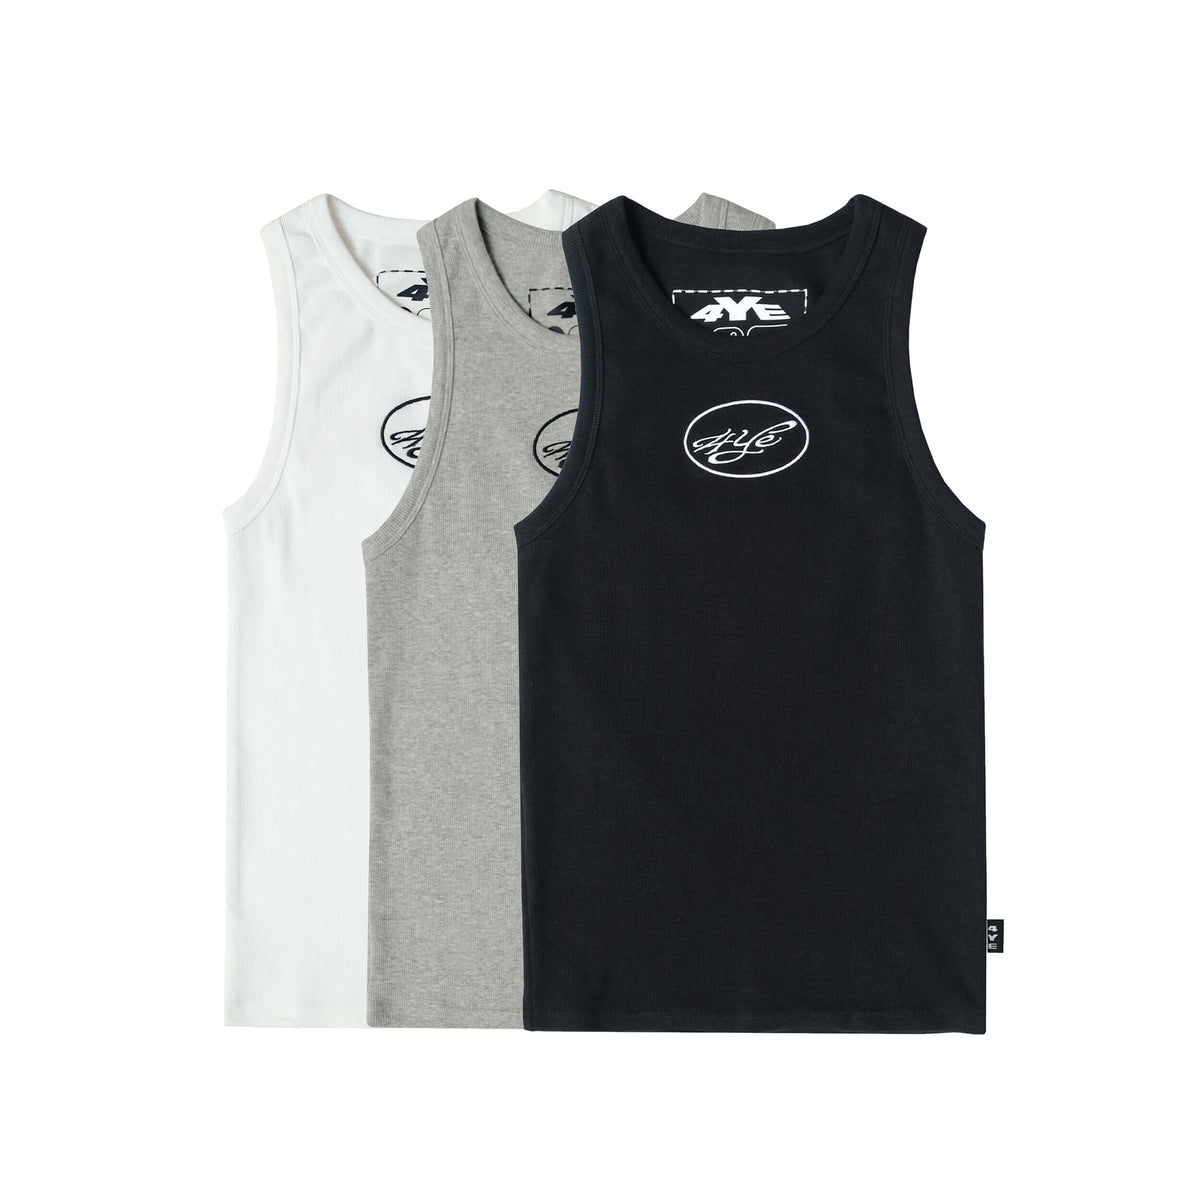 ribbed tank. chest embroidery. black grey and white. bundle of tank tops. mens and womens tanks. 